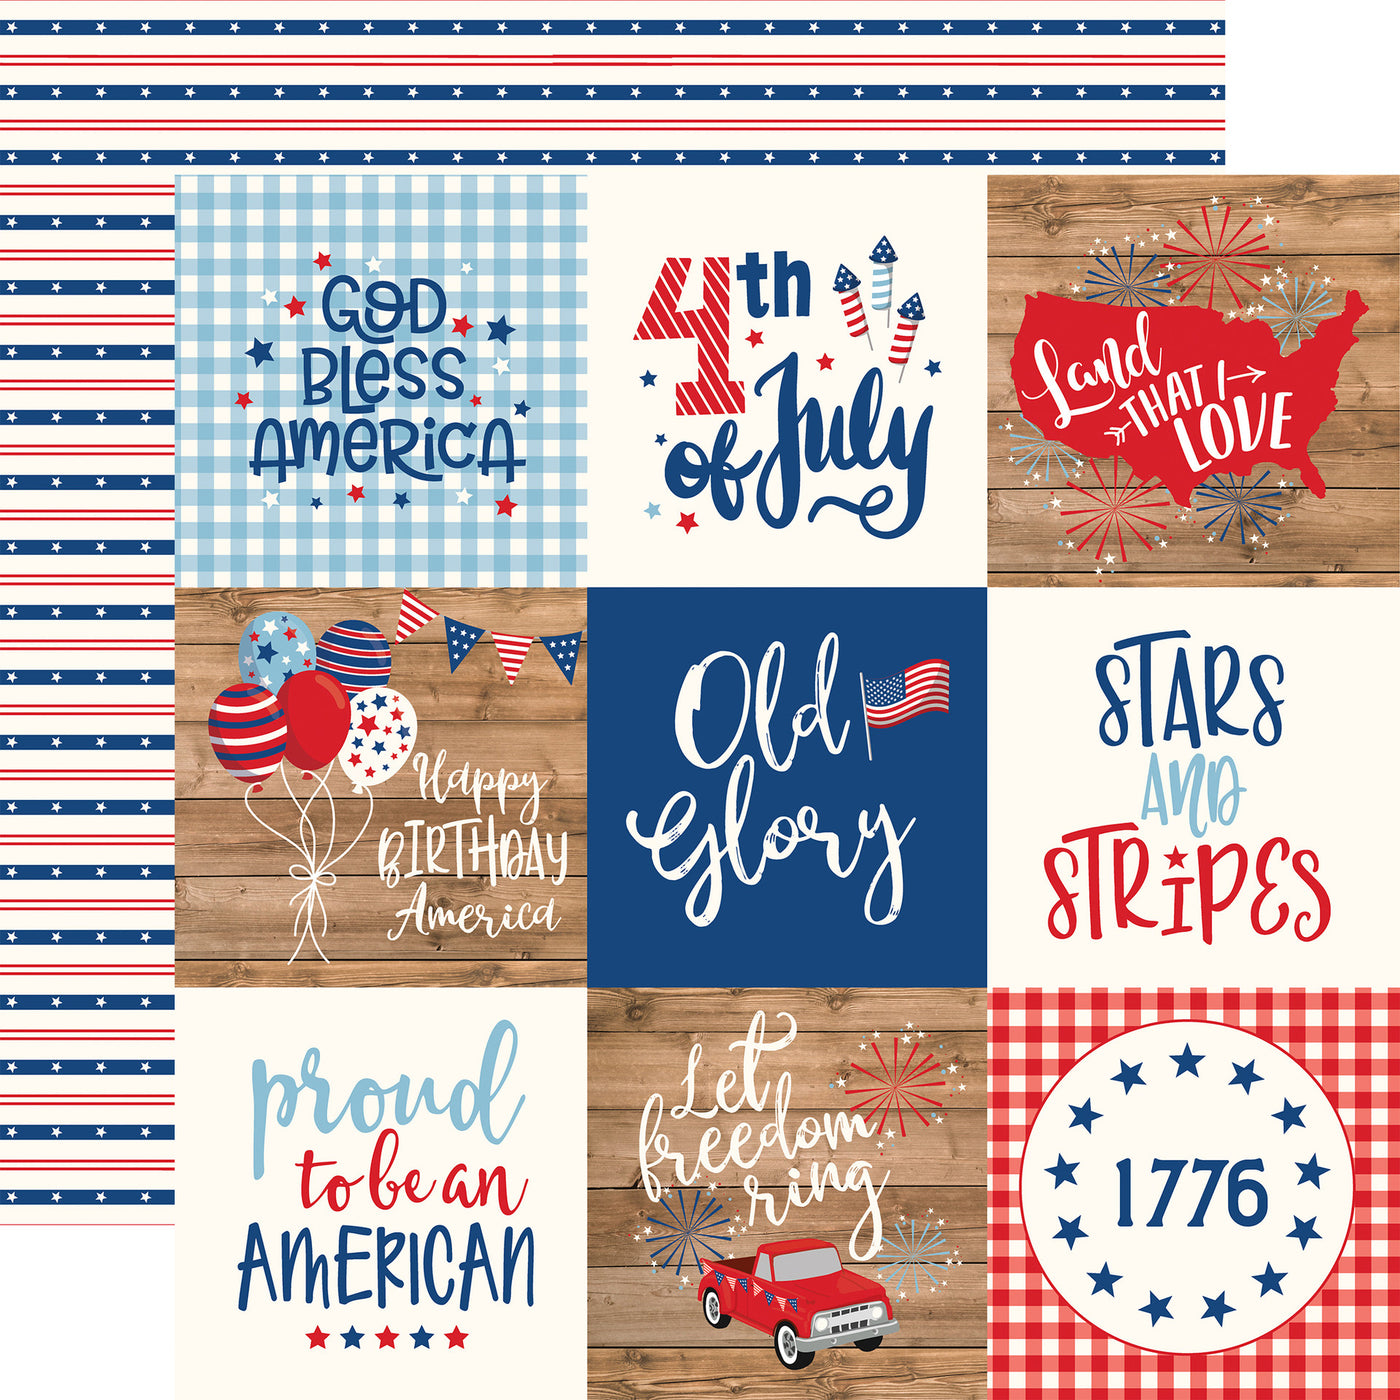 12x12 double-sided patterned paper - (Side A - red, white, and blue patriotic journaling cards; Side B - alternating red and blue stripes with patterns on a white background) - Echo Park Paper.